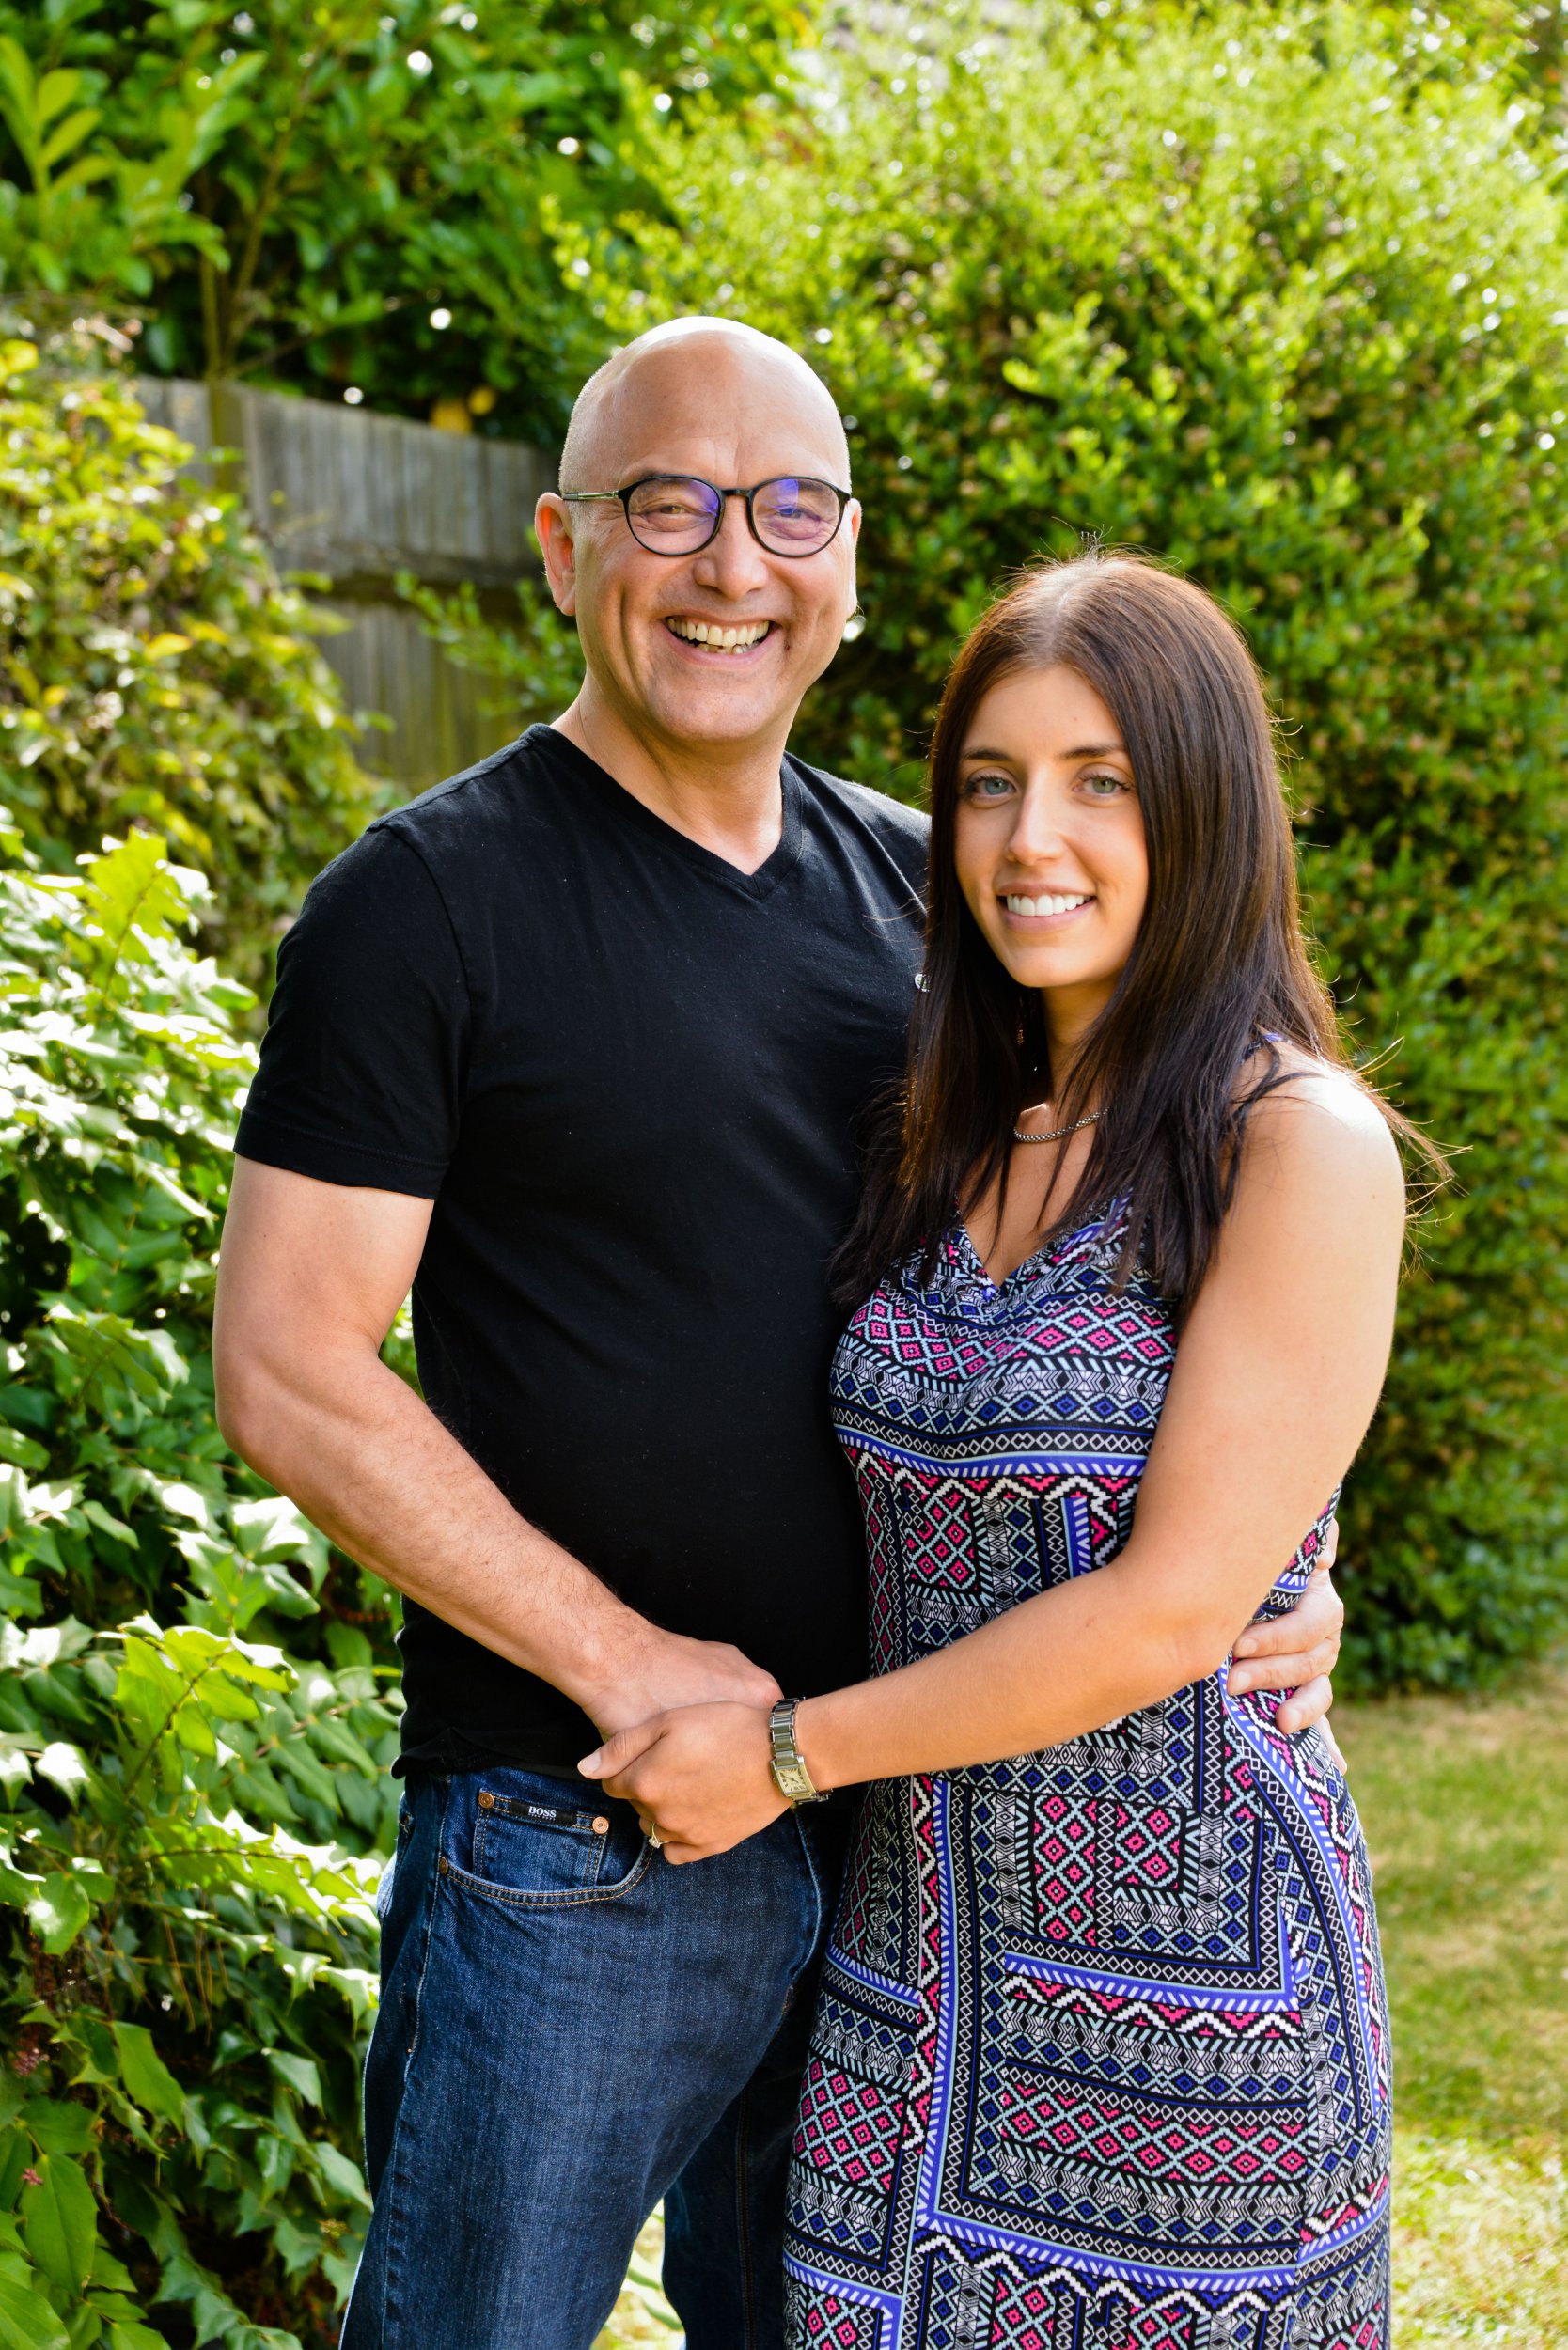 MasterChef 2021 Who is Gregg Wallace’s wife and do they have children